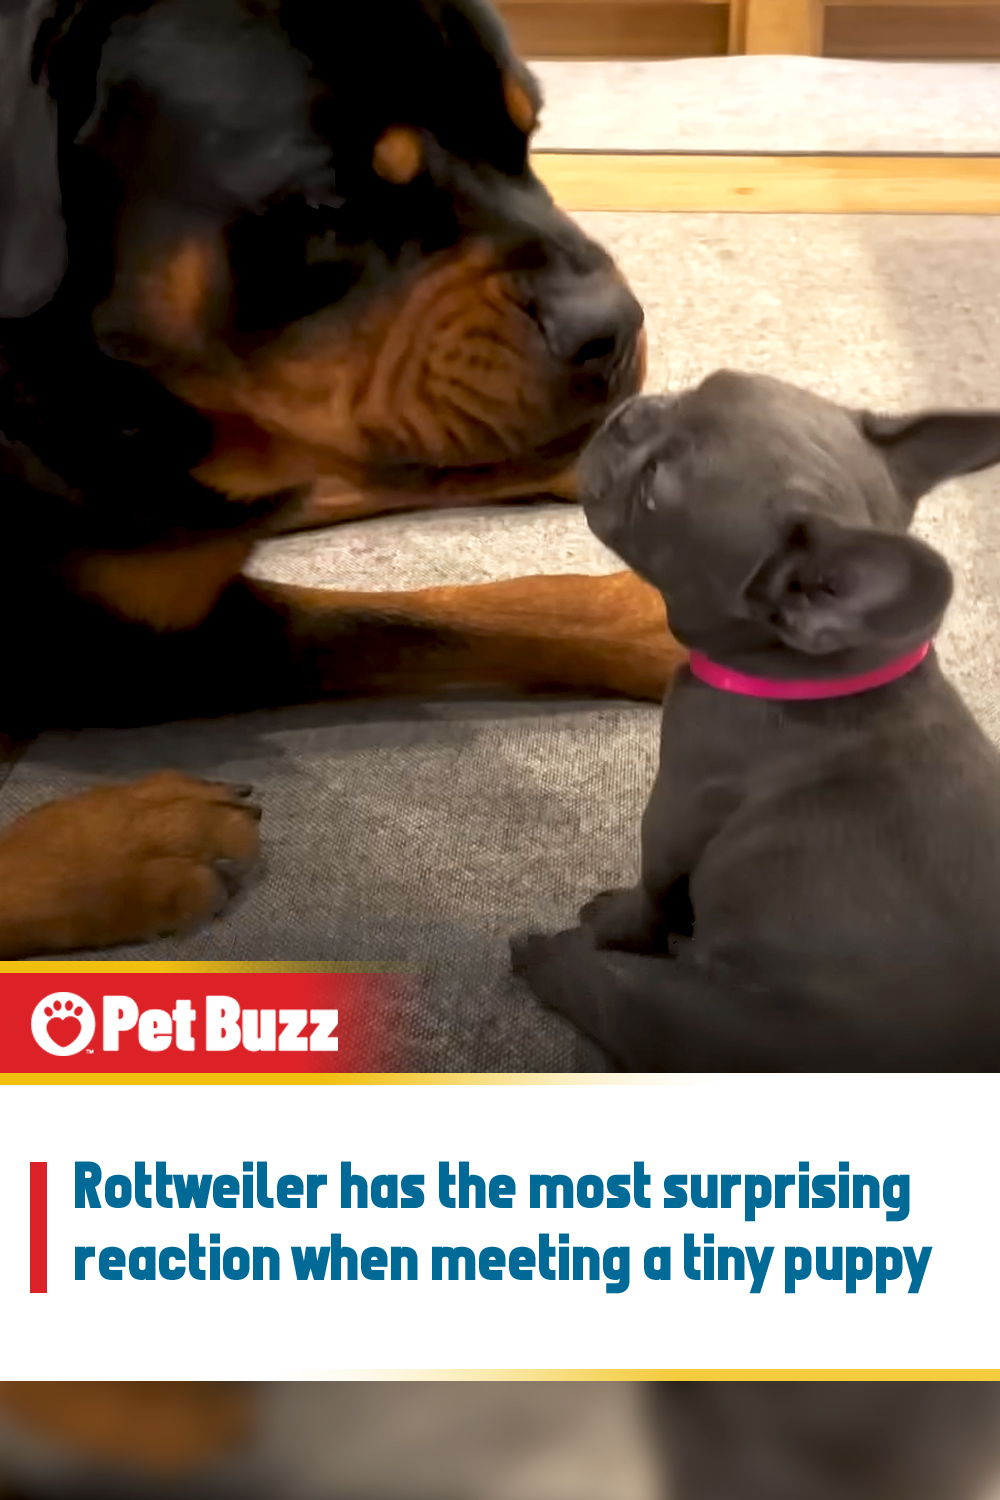 Rottweiler has the most surprising reaction when meeting a tiny puppy